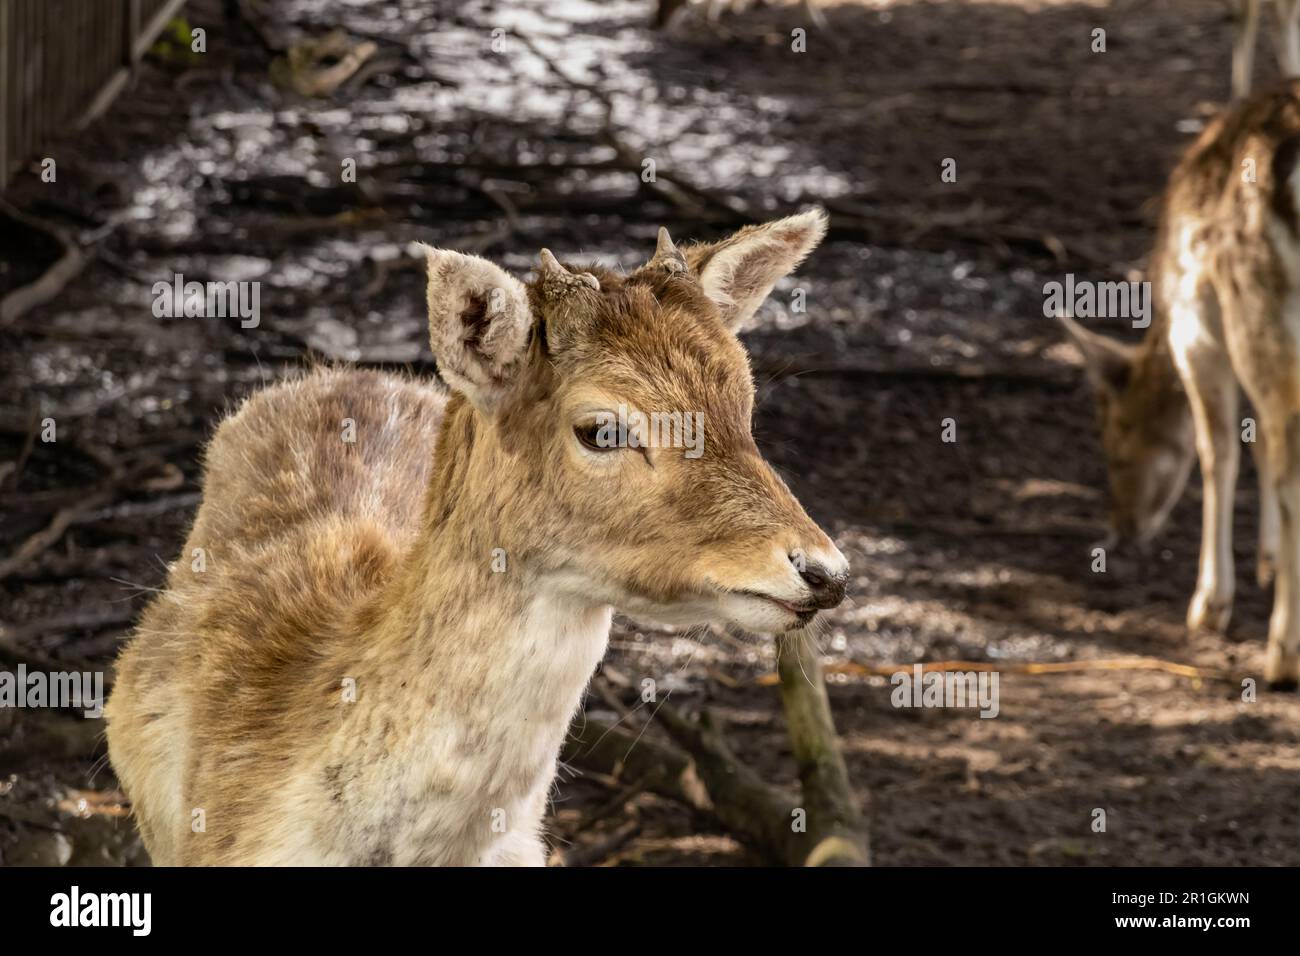 Fallow deer, Dama dama, fawn, young male with antler buttons eating in deer park, Hilversum, Netherlands Stock Photo